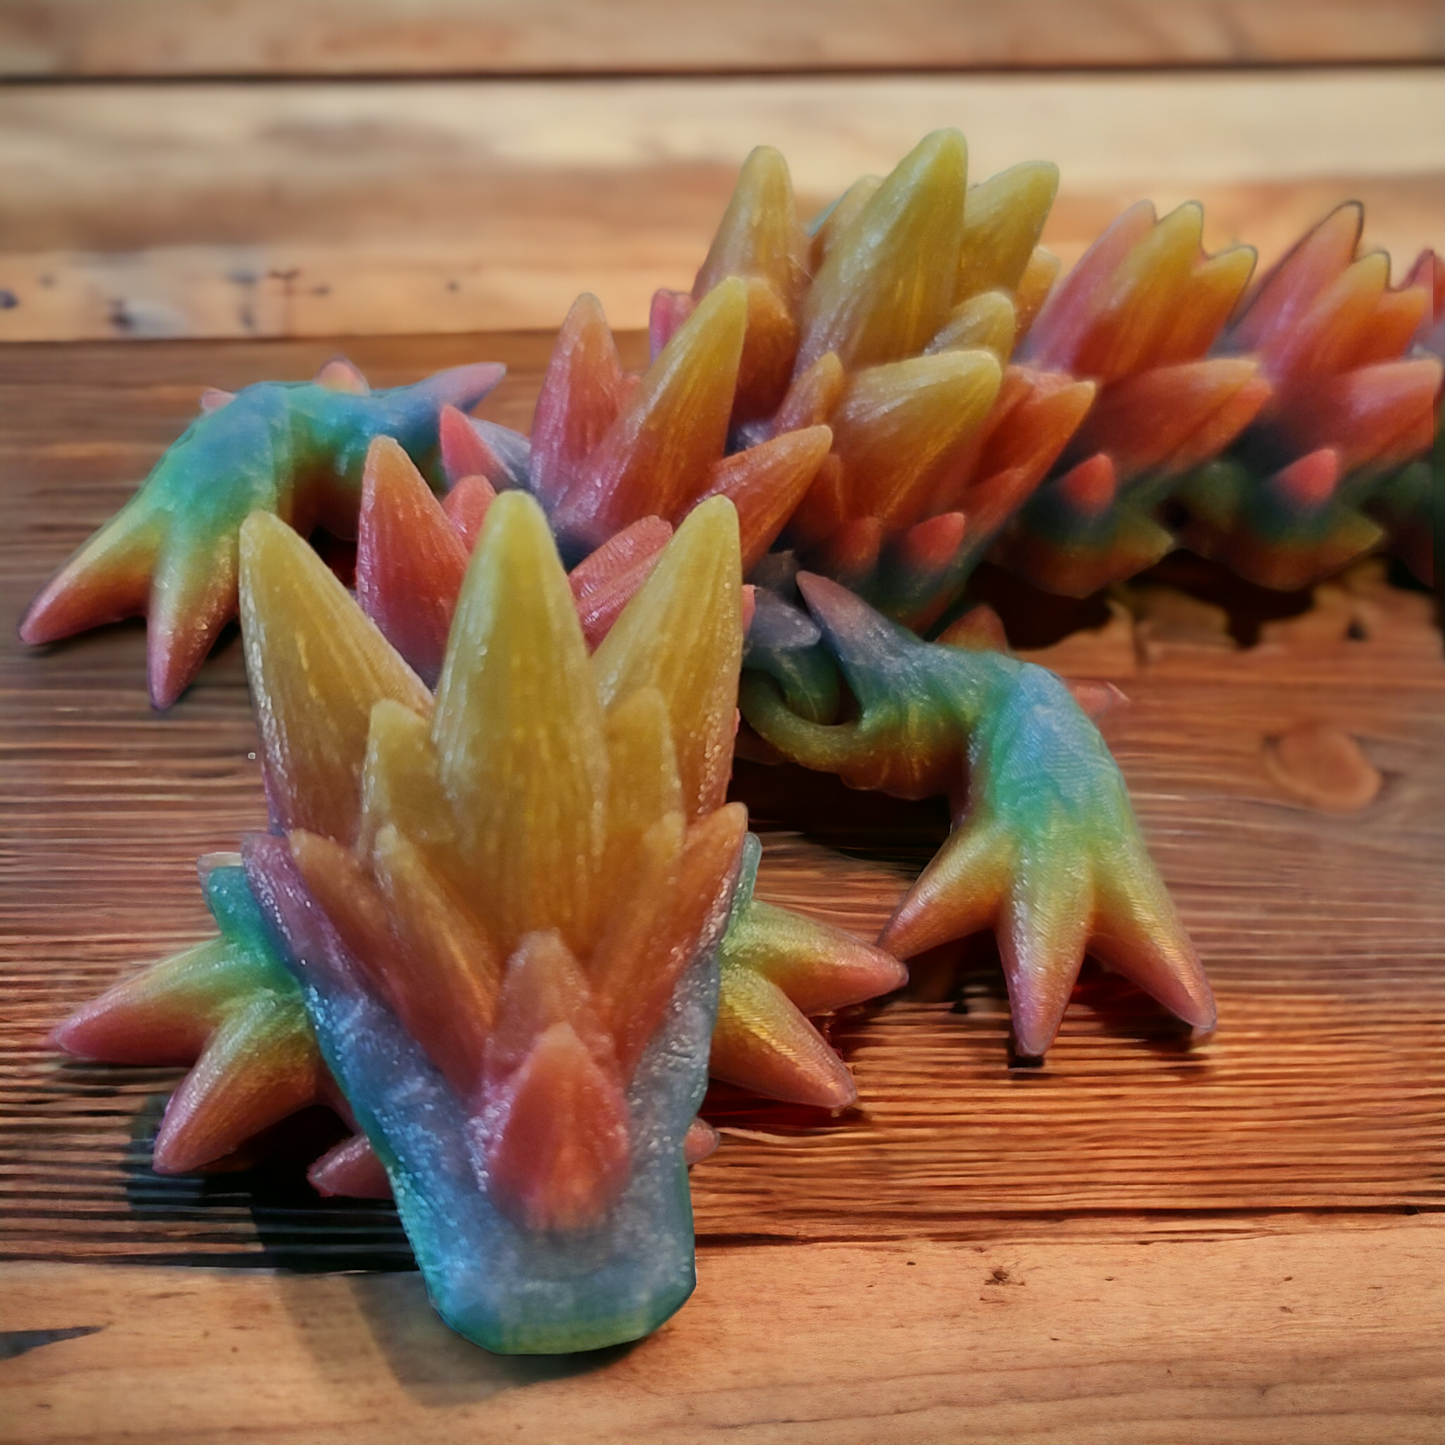 3d print, dragon, Armored Spike Dragon, for him, for her, birthday gift, christmas gift, fidget, child toy, figurine, color Glow in the dark